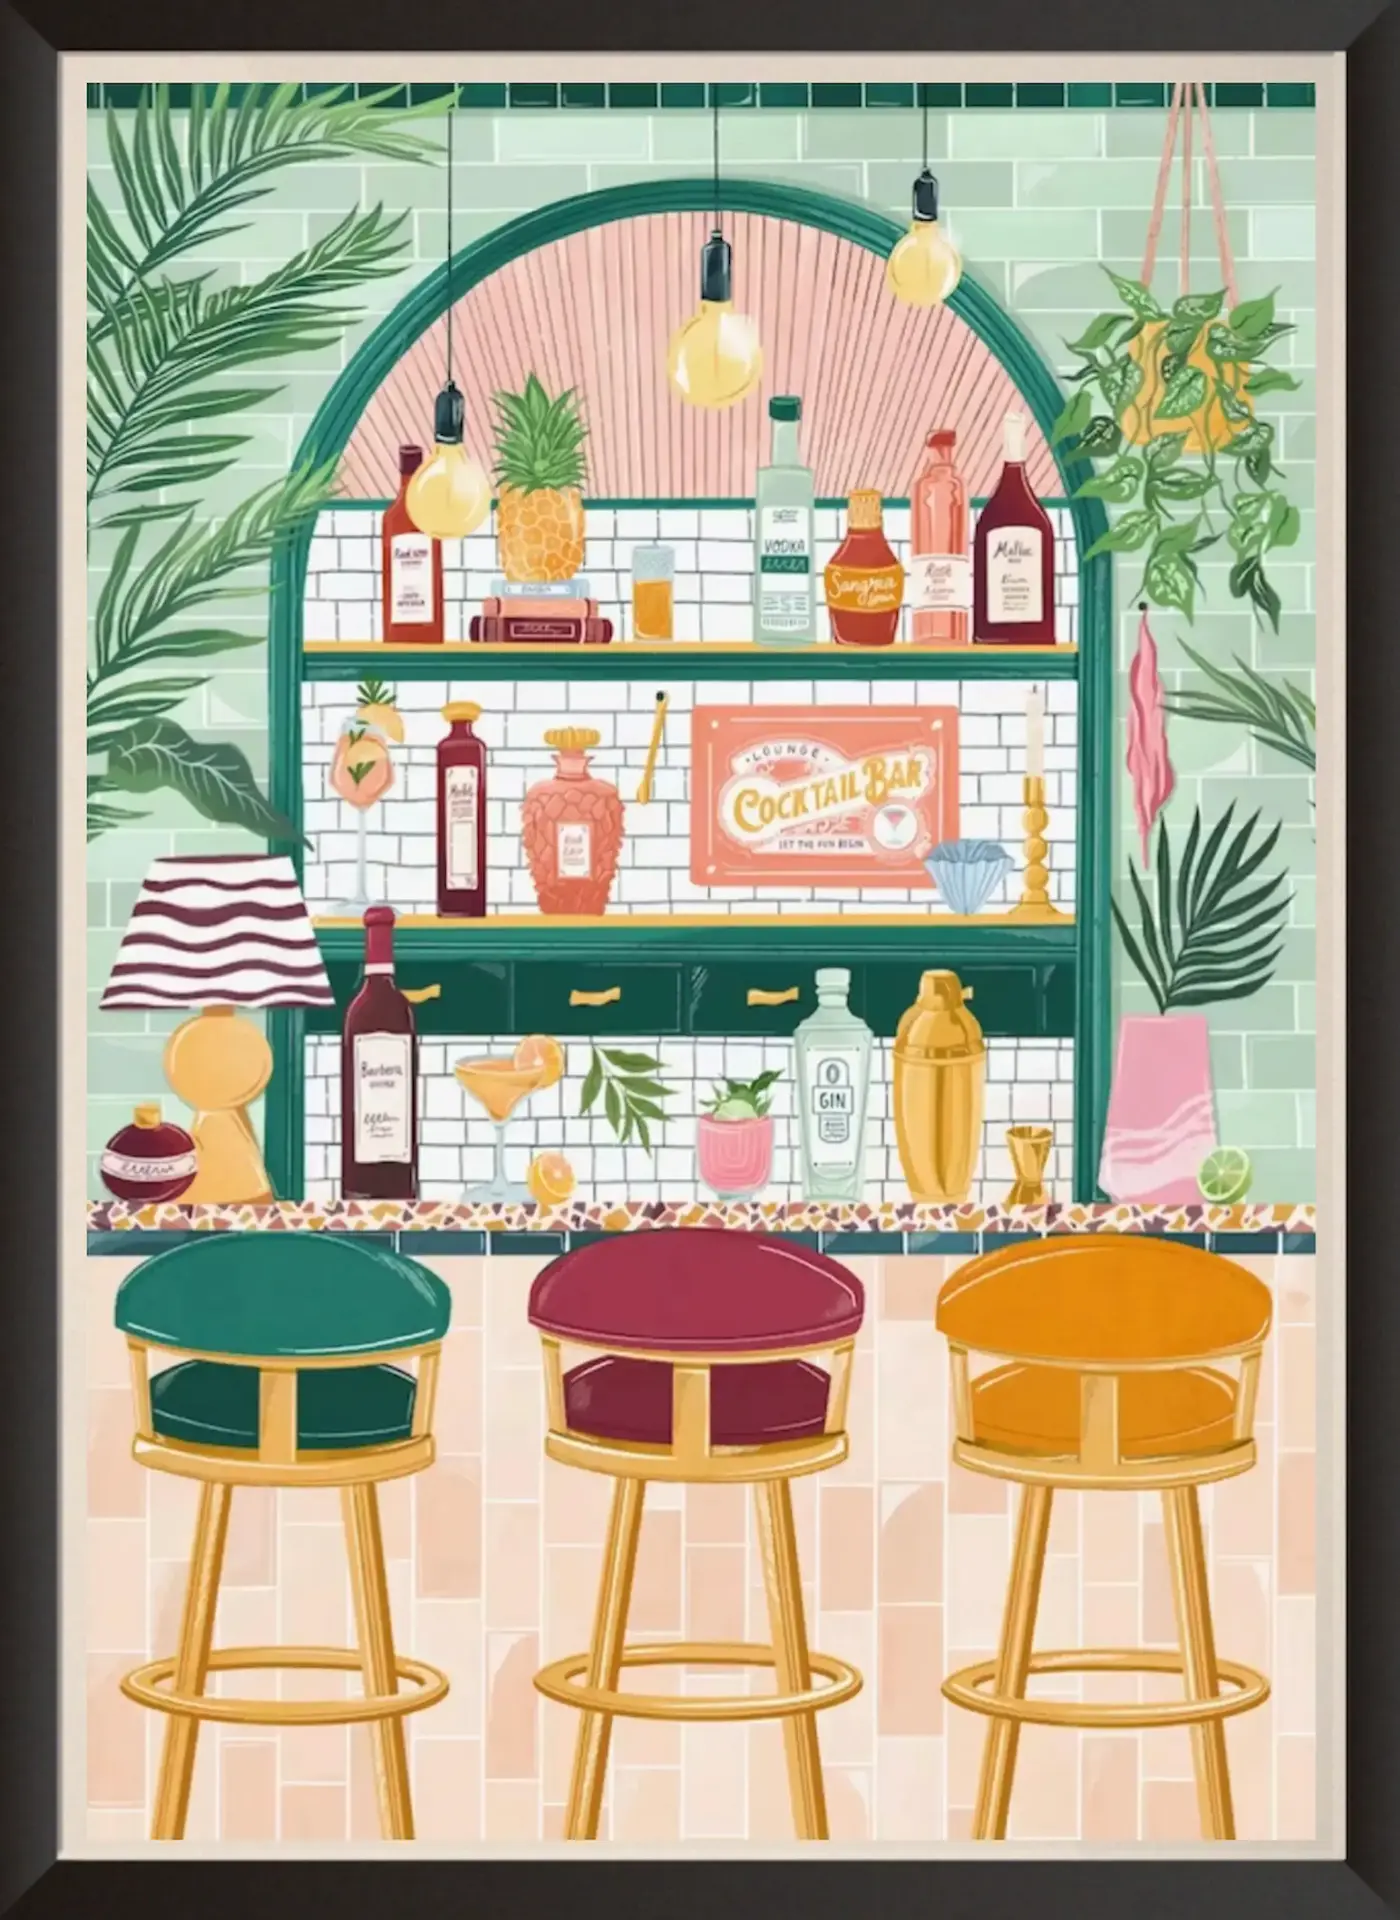 Artwork of the Ruby's pop up bar